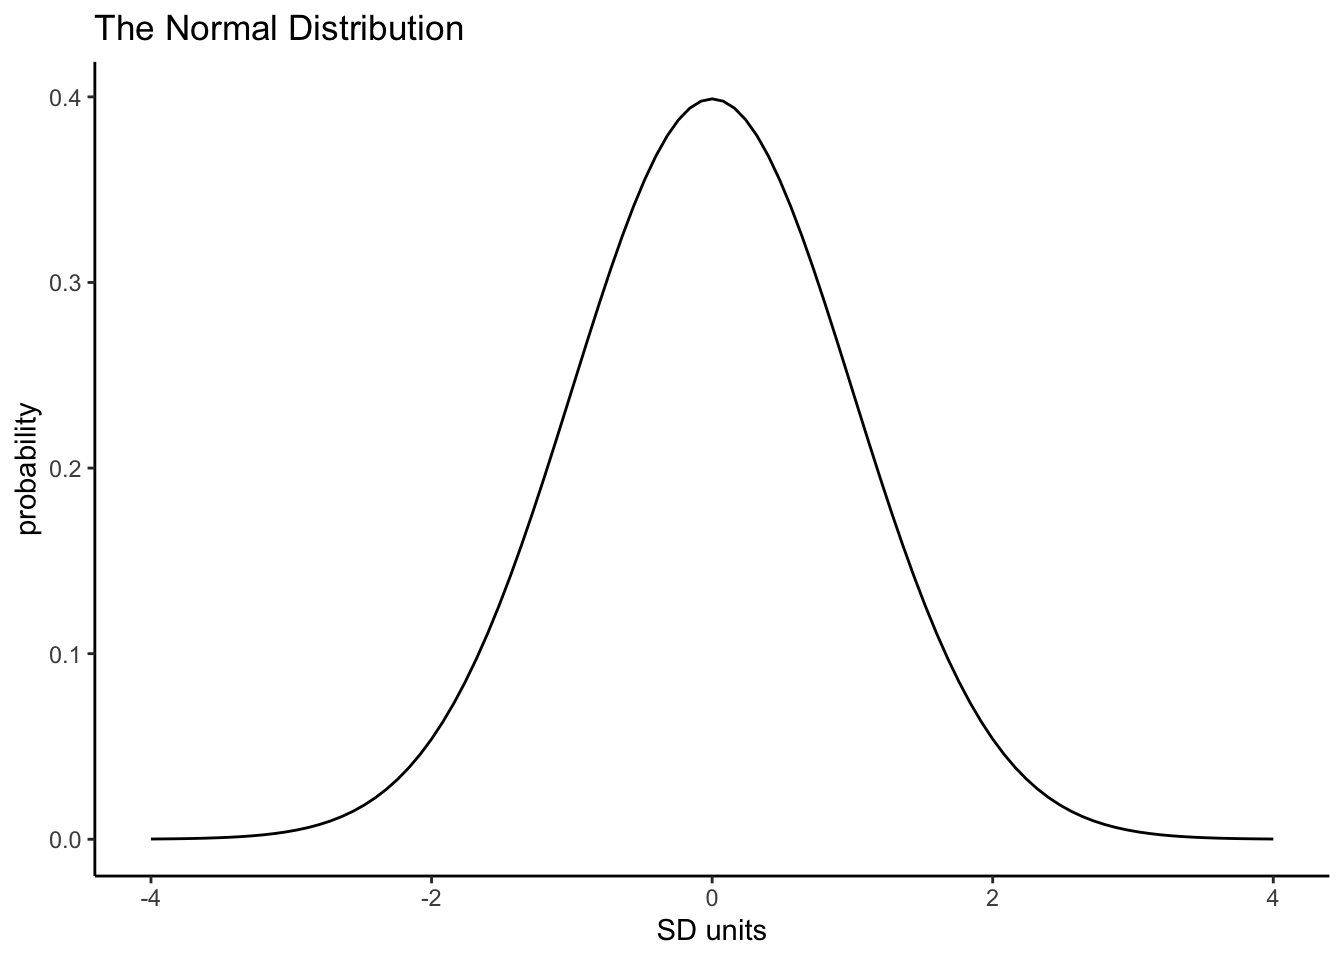 The Normal Distribution with Mean = 0 and SD = 1